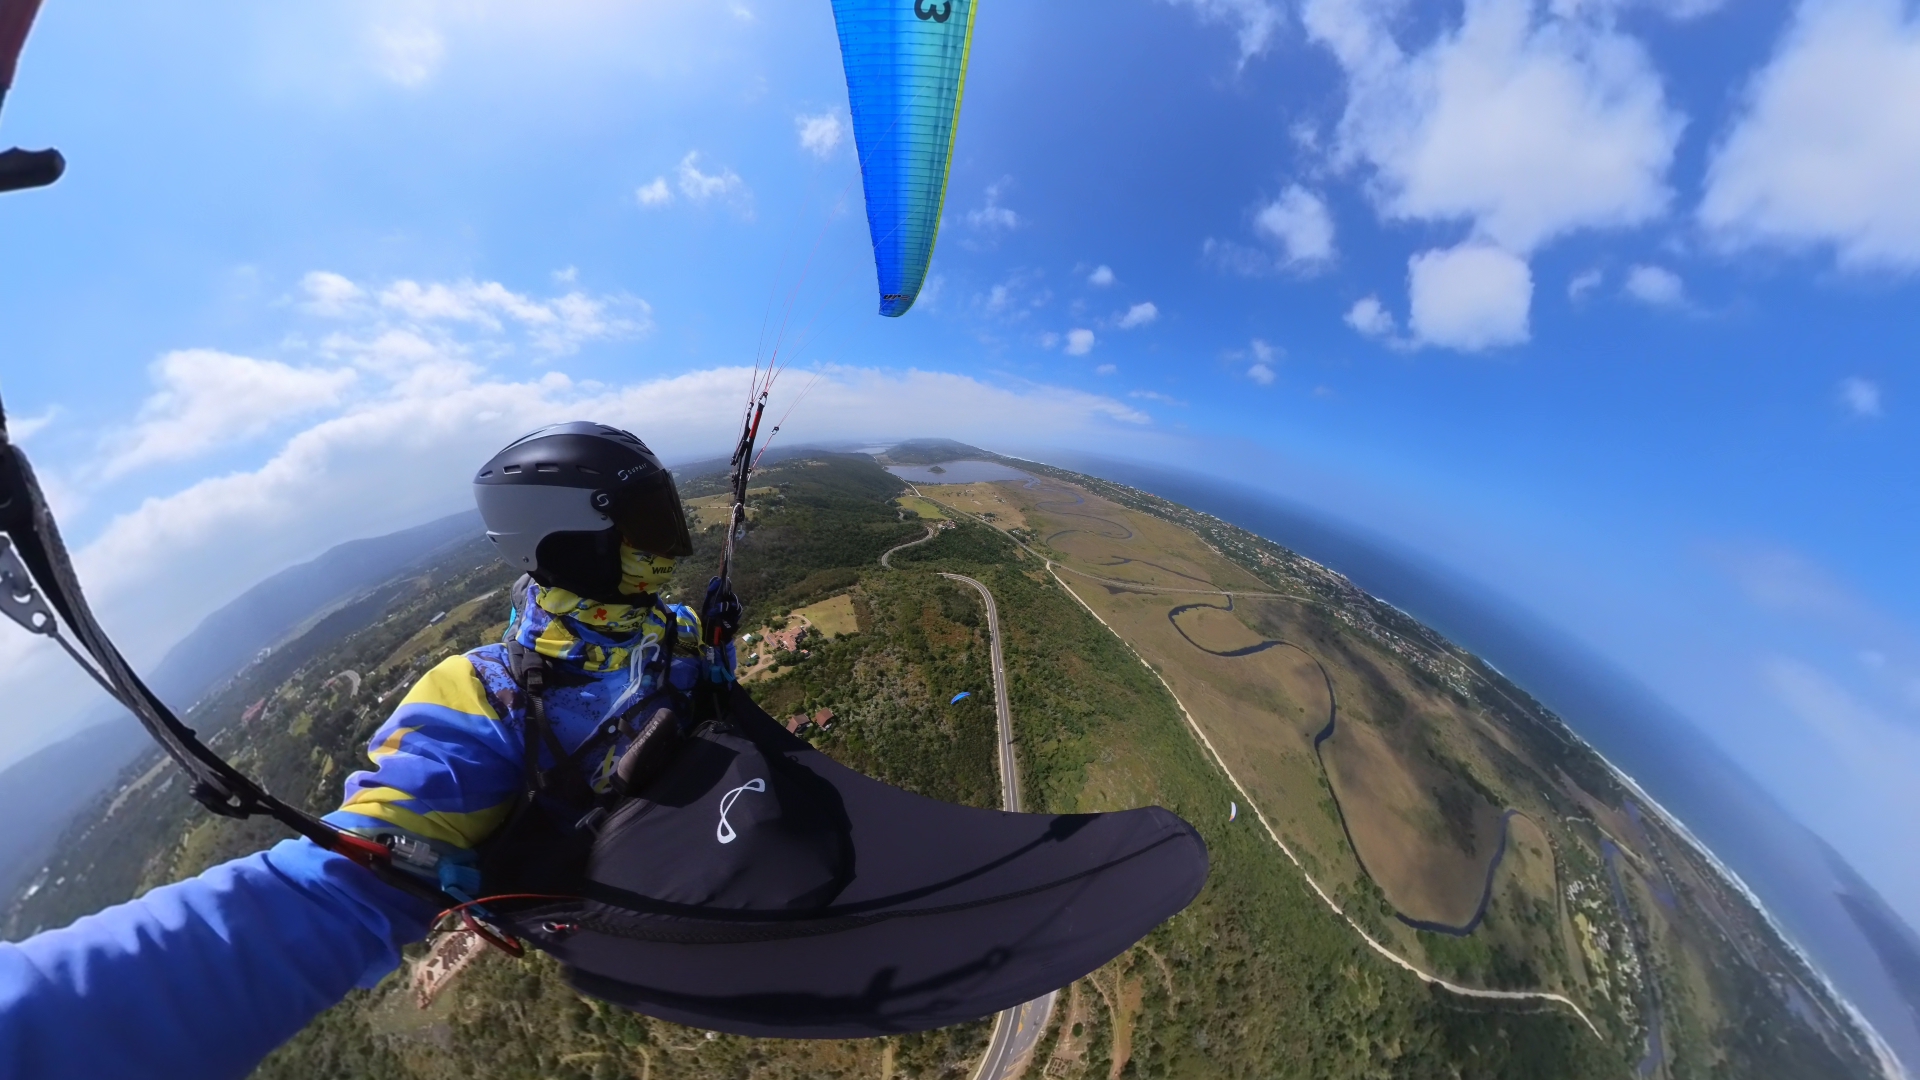 Hang gliding and paragliding gift vouchers